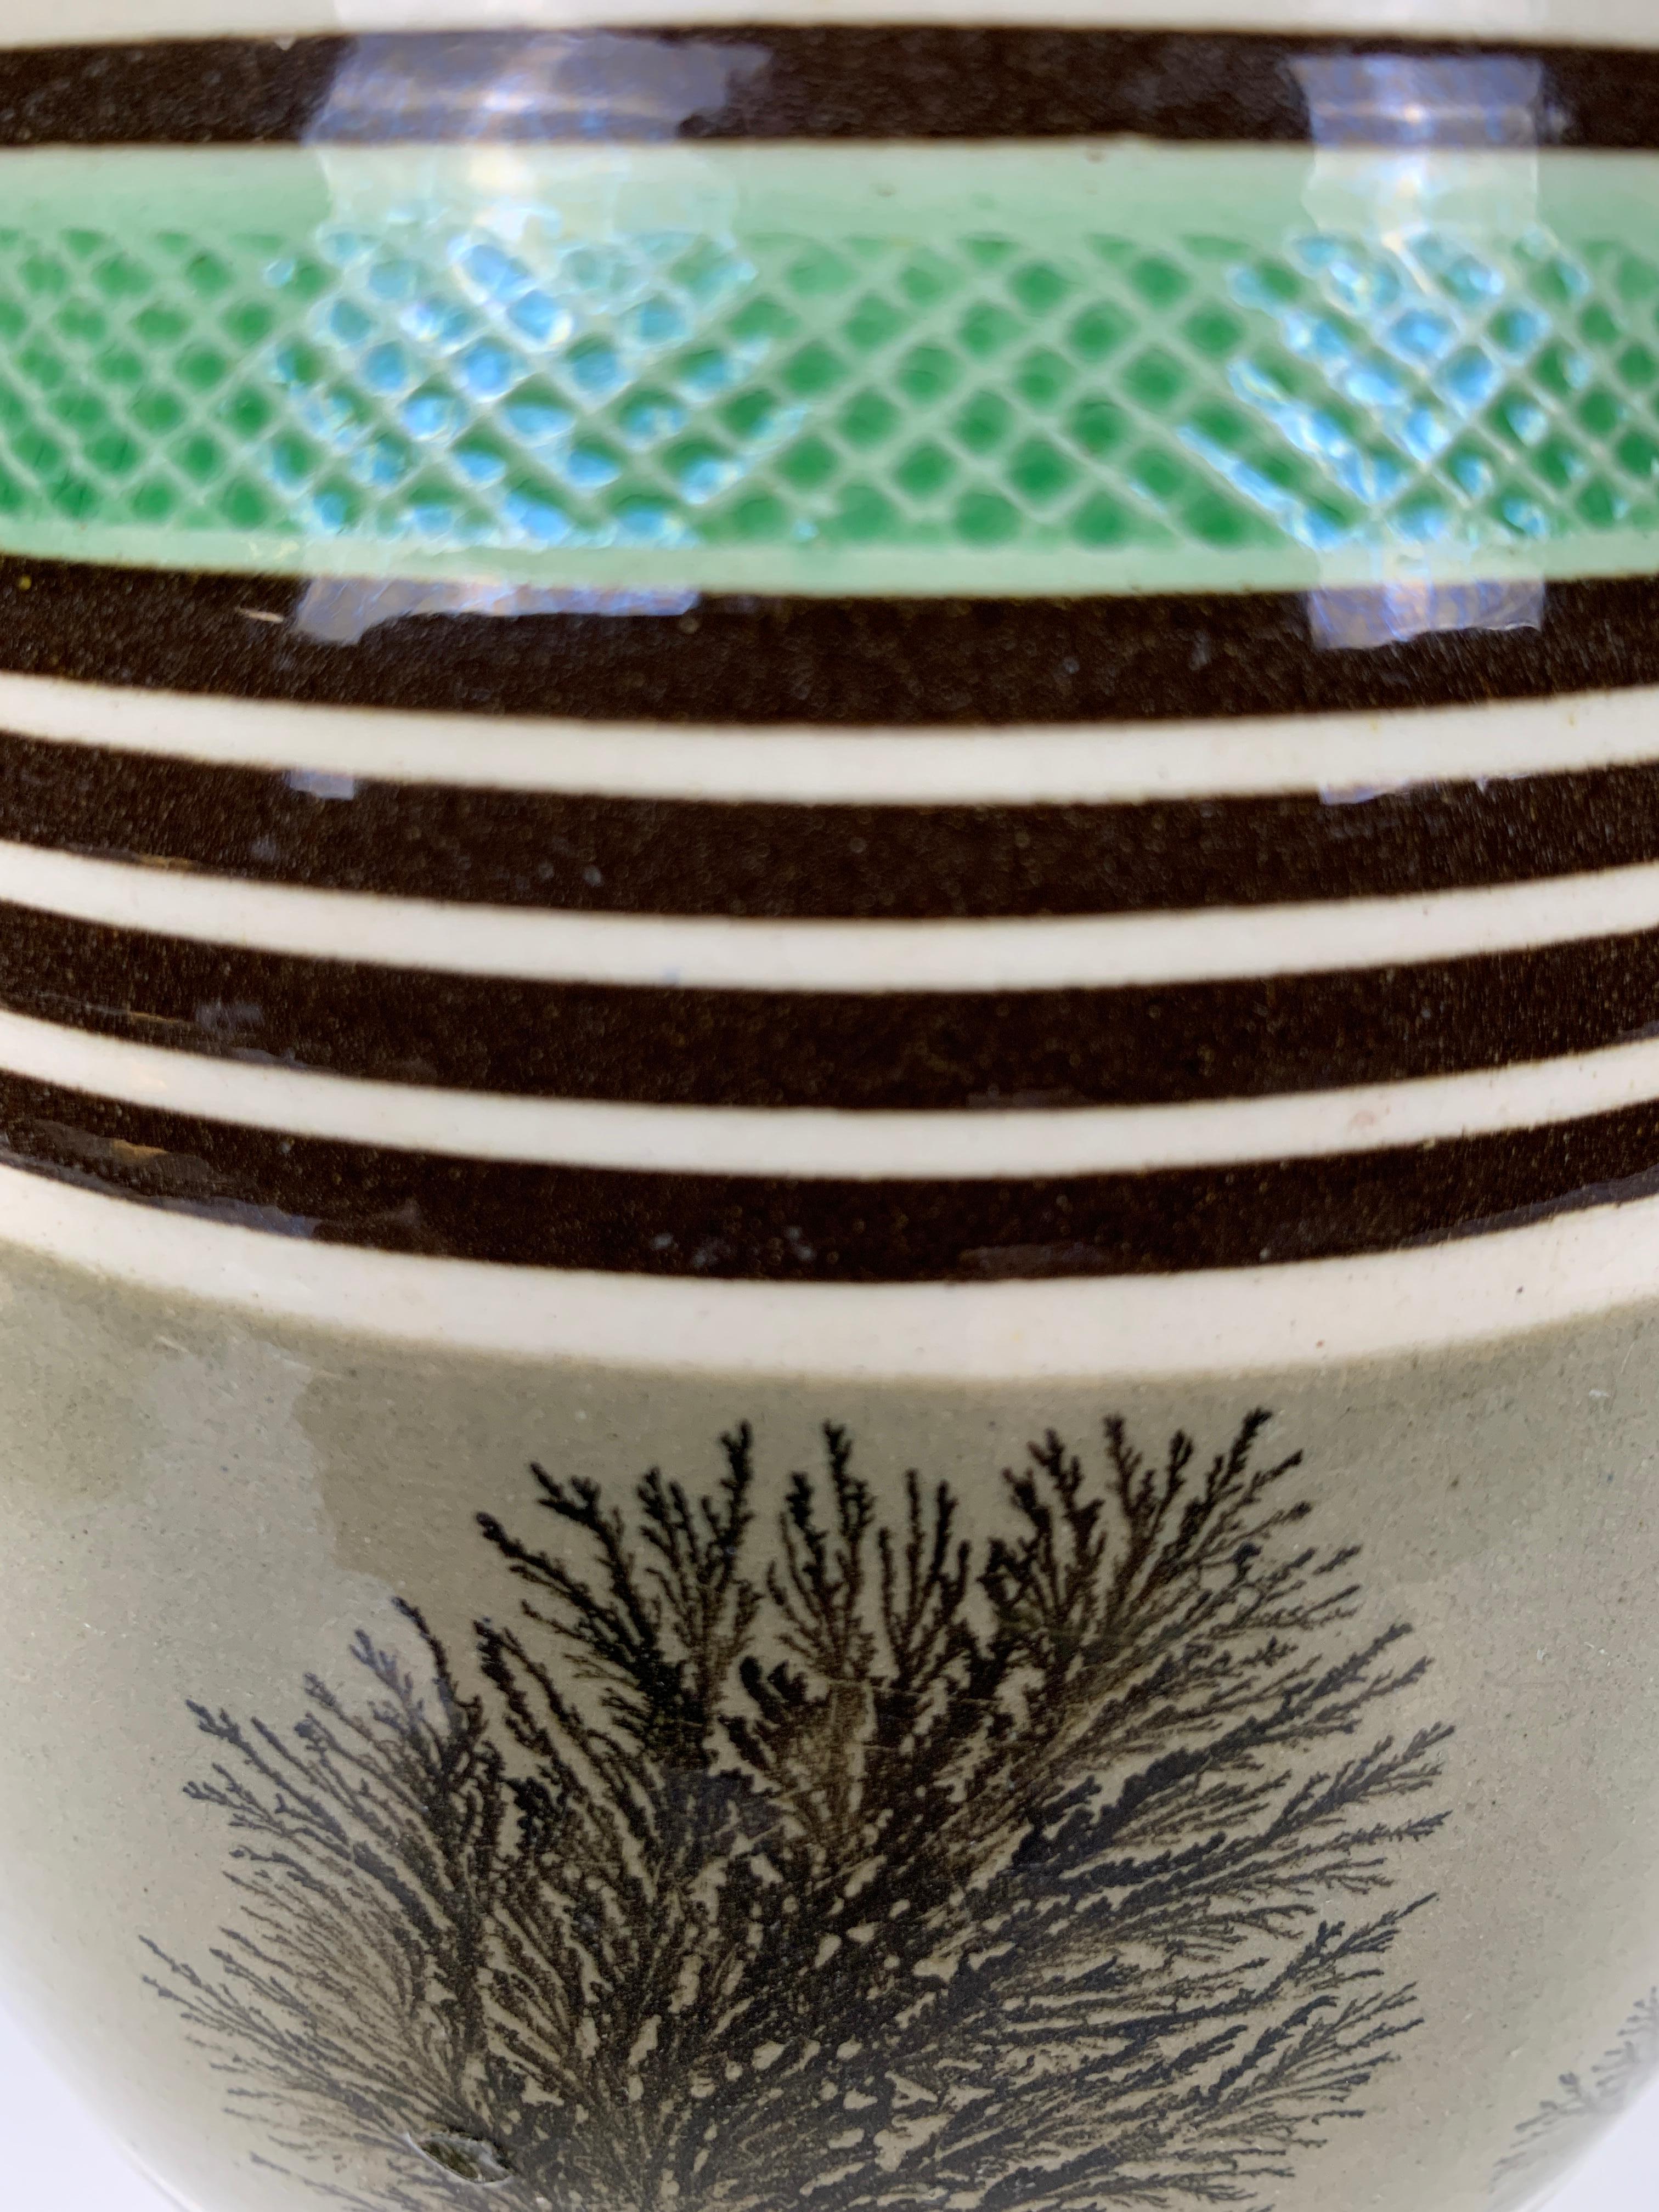 19th Century Large Slip Decorated Antique Mochaware Pitcher with Mocha Trees Made Circa 1815